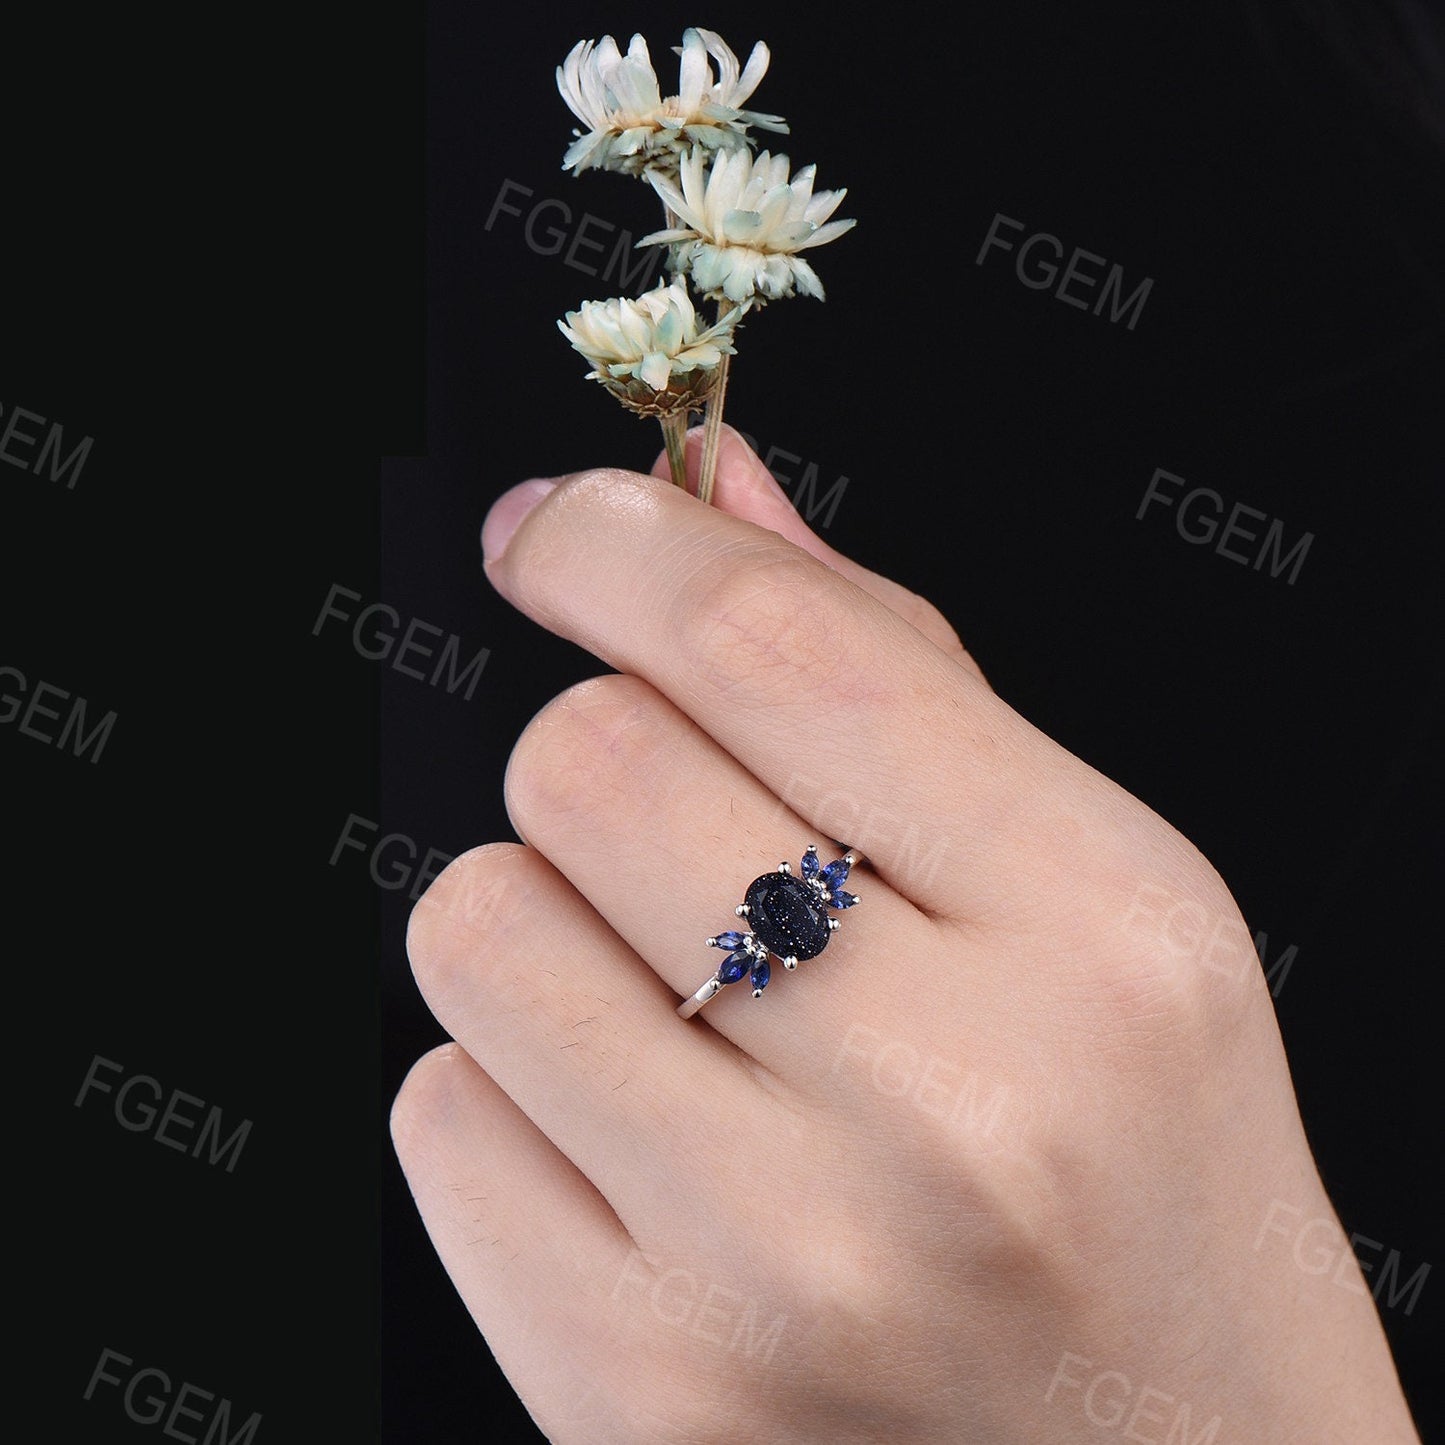 1.5ct Oval Cut Blue Sandstone Cluster Engagement Rings Galaxy Starry Sky Ring Blue Sapphire Ring Unique Handmade Proposal Gifts for Women